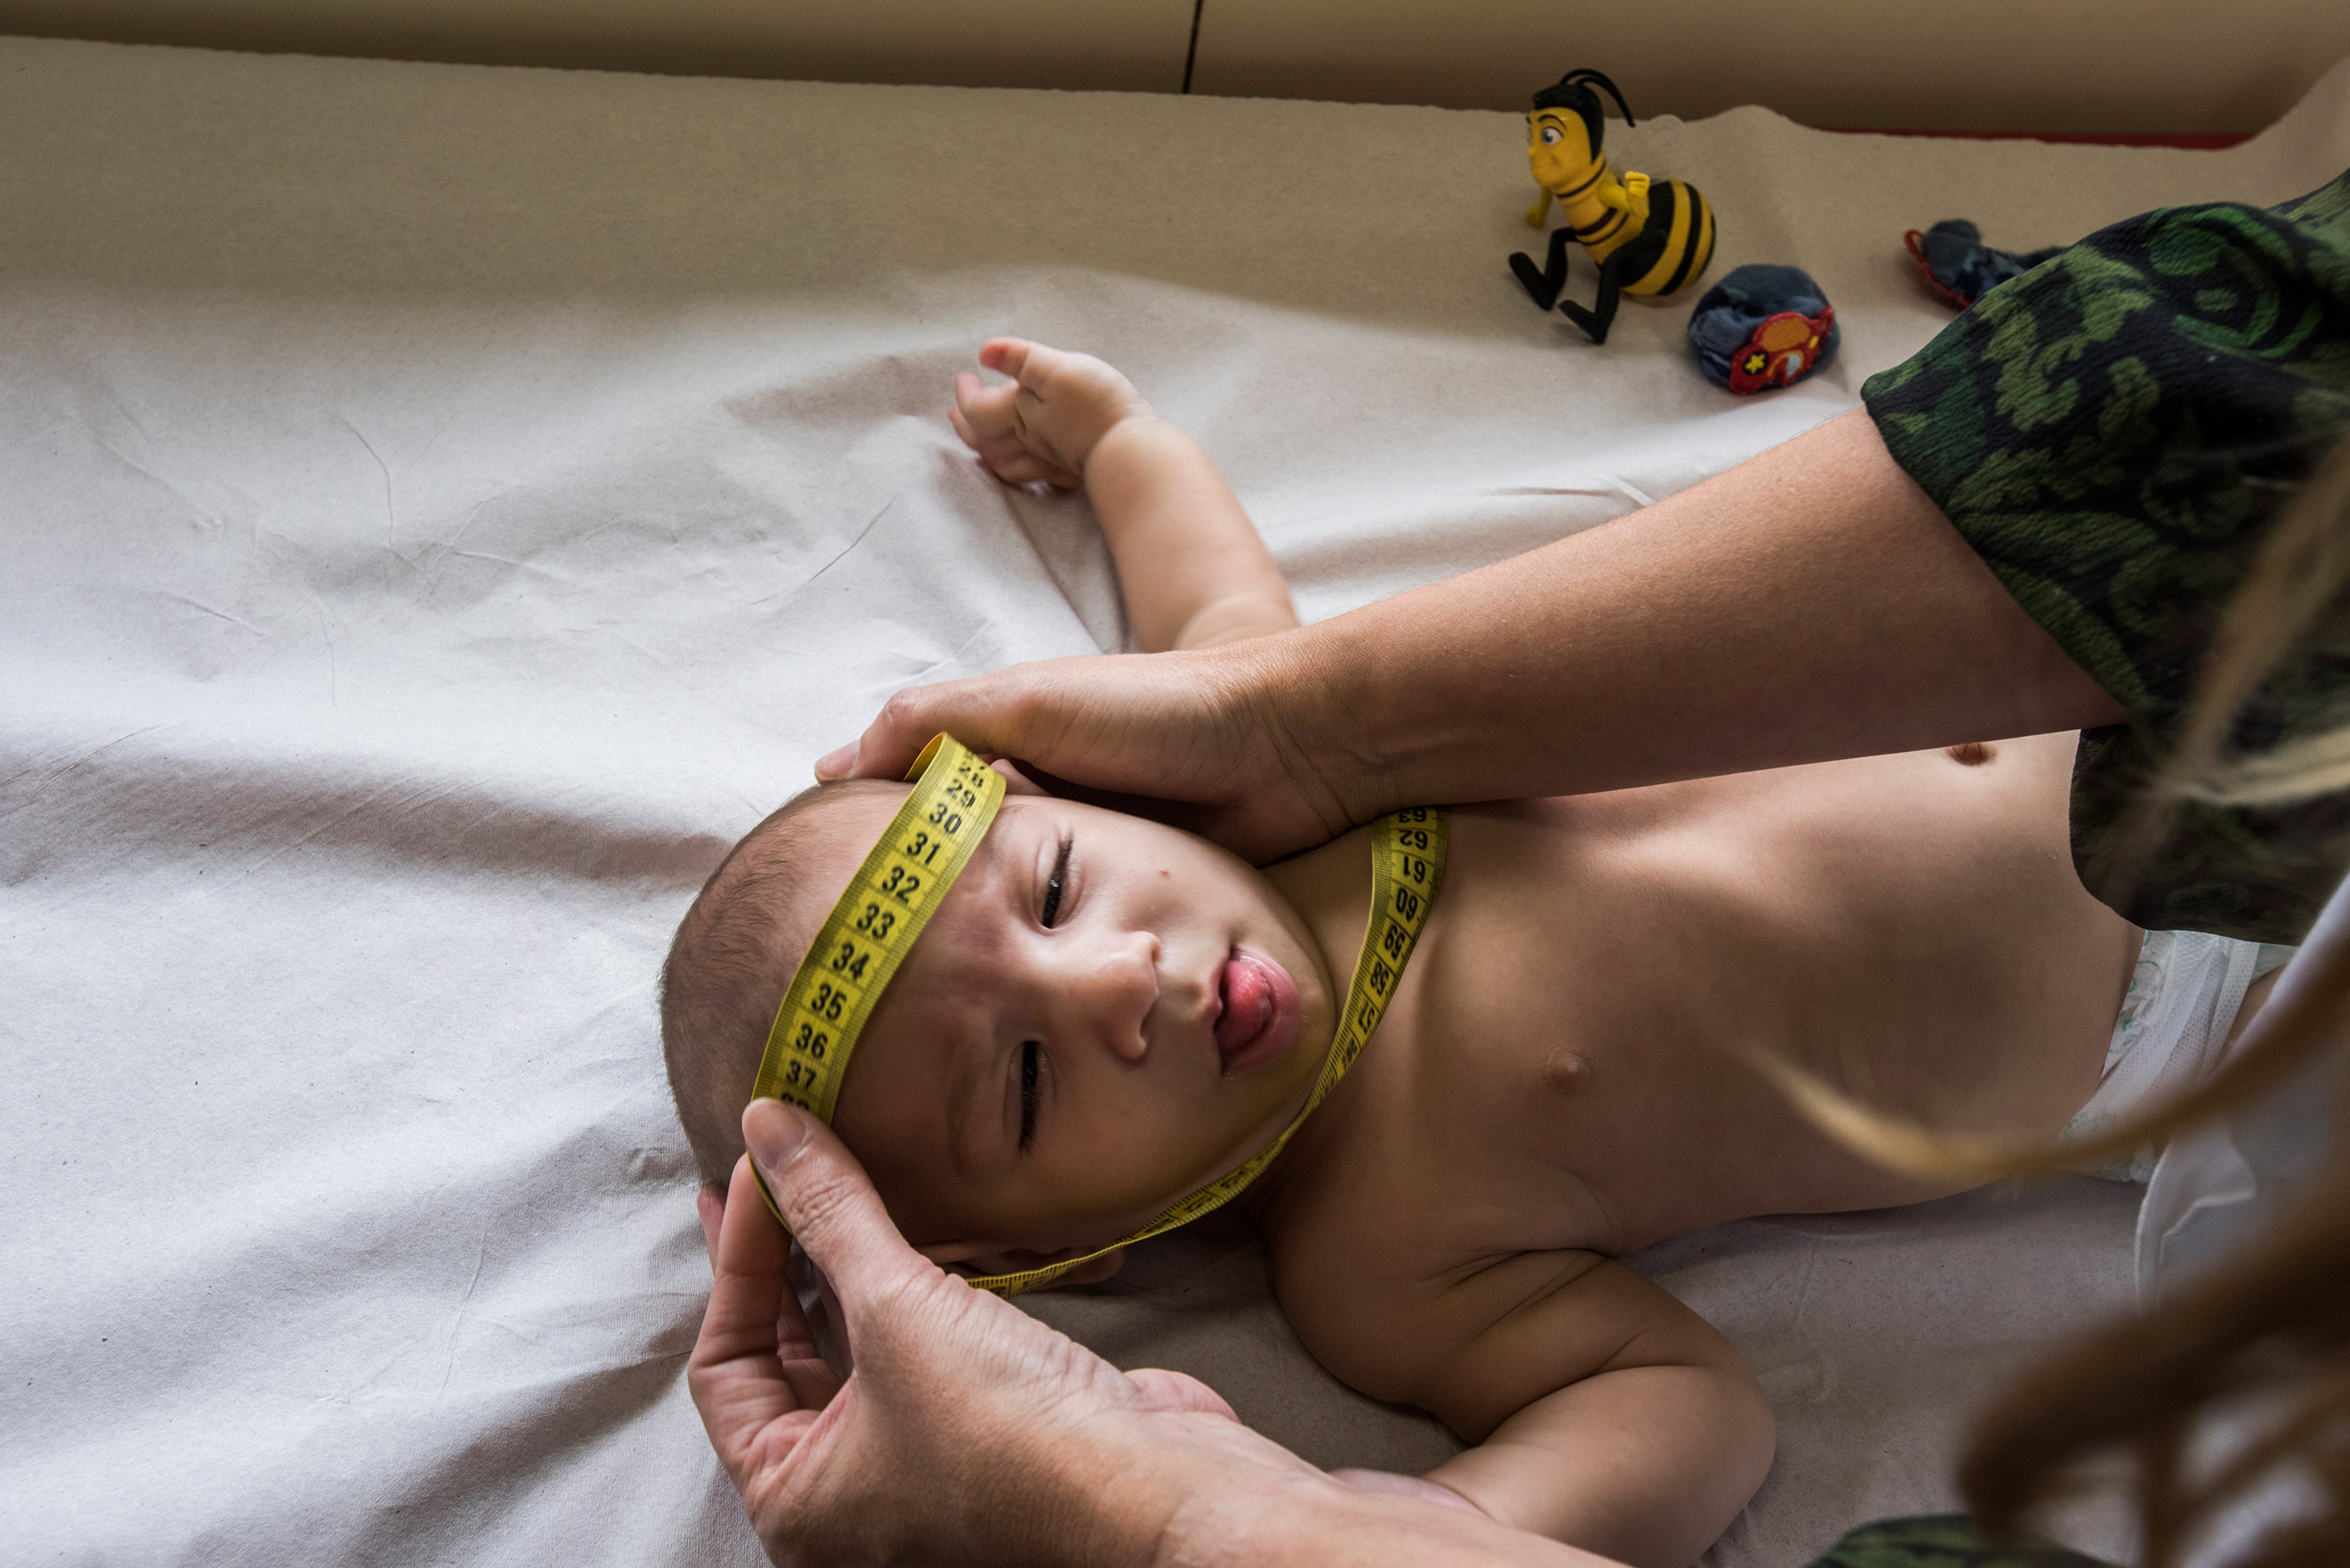 Dr. Vanessa Van Der Linden, a neurologist at the Associacao de Assistencia a Crianca Deficiente, measures the head of a baby with microcephaly in Recife, Brazil, Feb. 1, 2016. This center has seen 69 children with microcephaly so far.